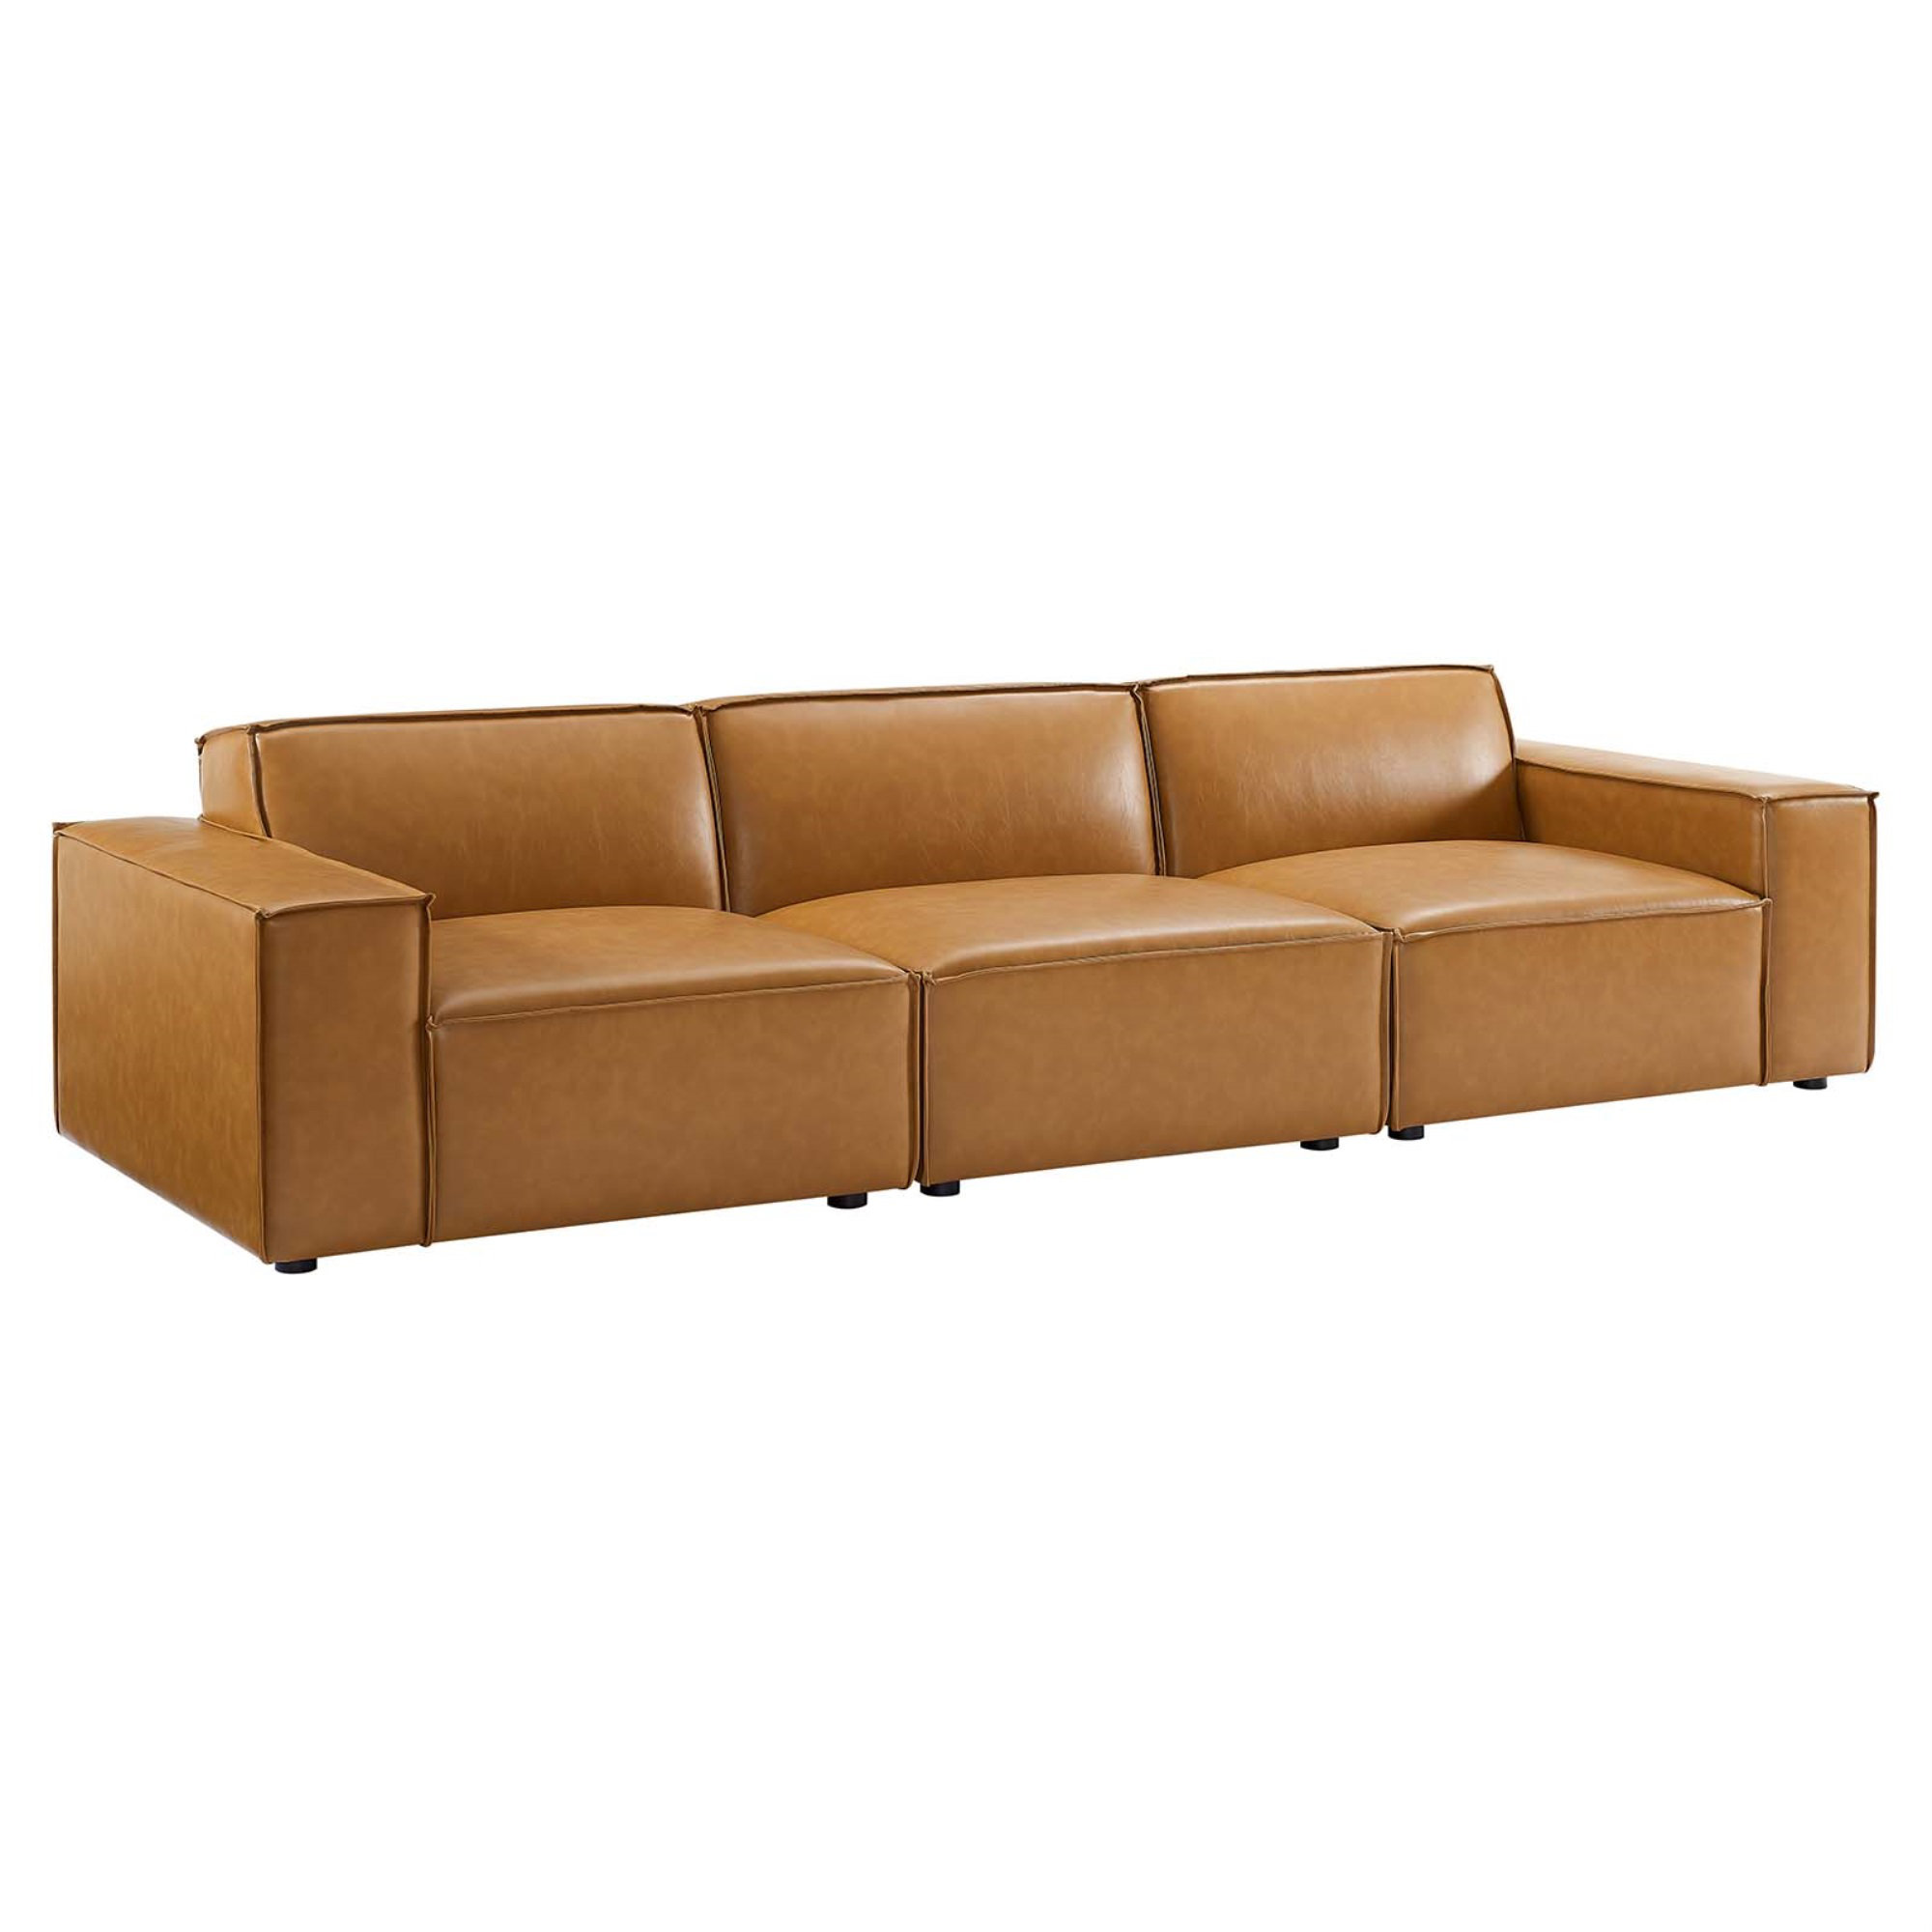 Restore Your Old Leather Sofa for Your Trendy New York Home